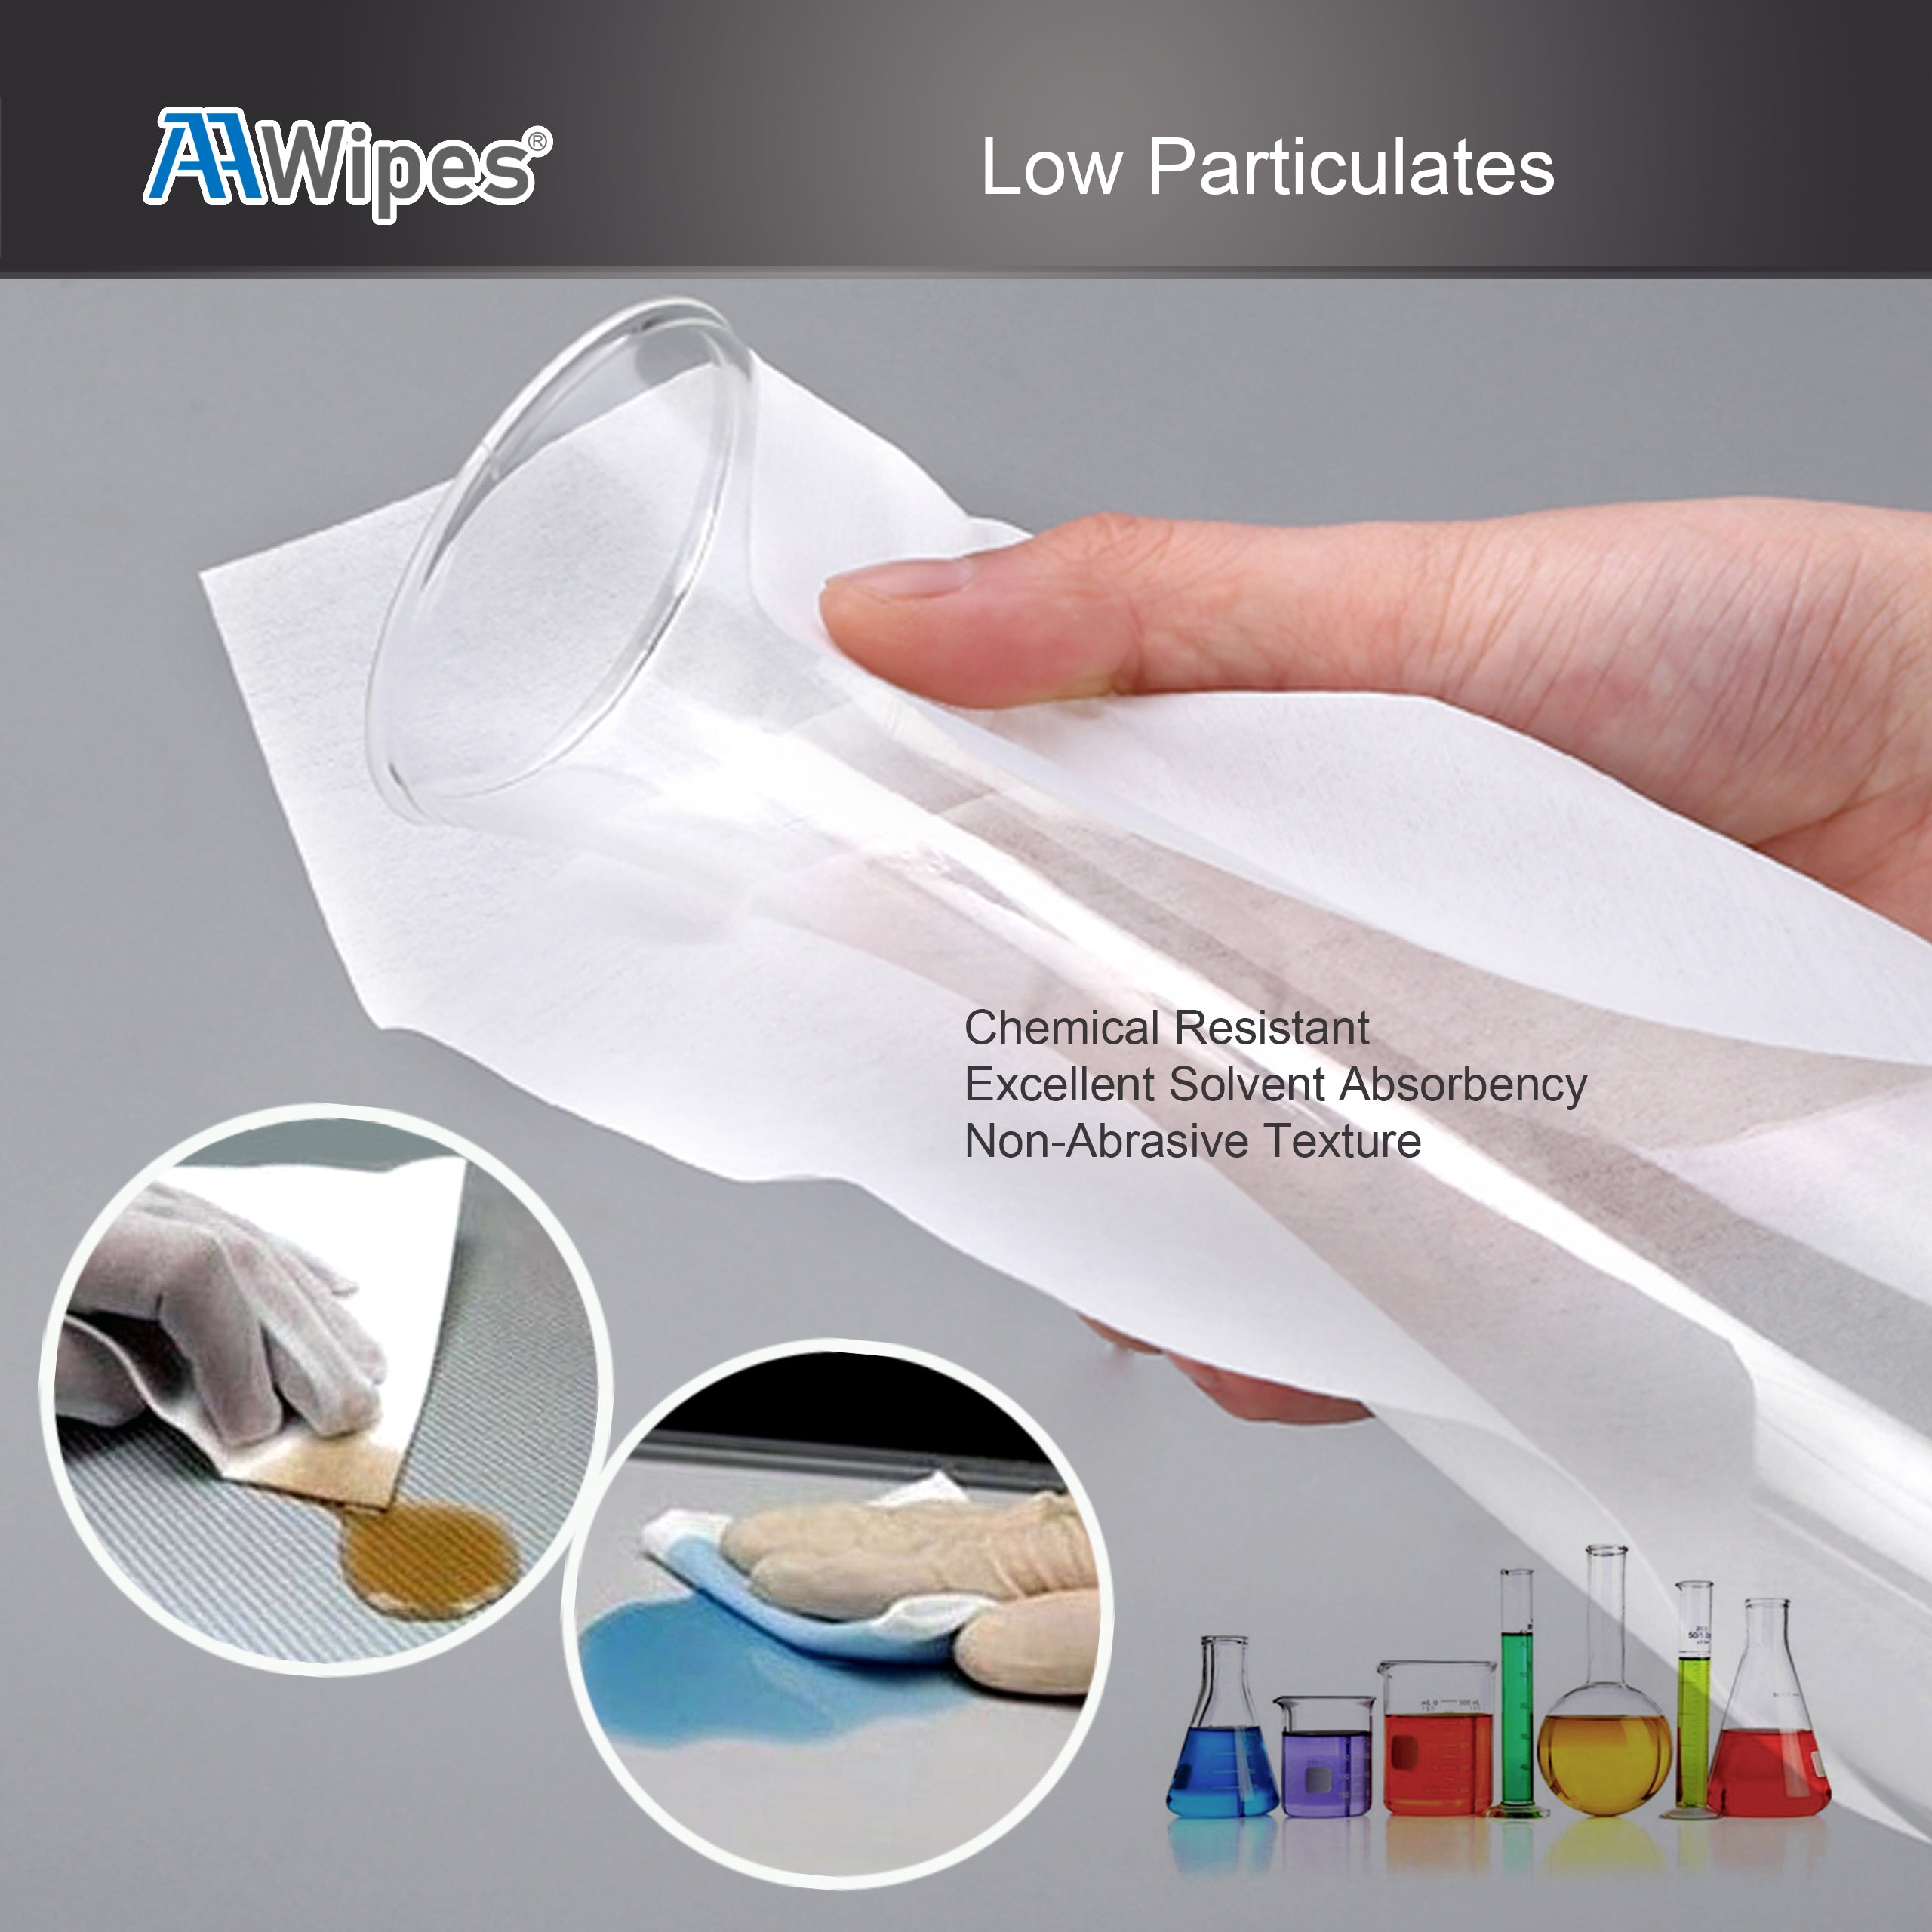 Food and Beverage Processing Cleanroom Wipes 12"x12" Cellulose/Polyester Nonwoven Wipers for for Lab, Electronics, Pharmaceutical, Printing and Semiconductor Industries. 3,000 wipes/box in 20 bags (No. NW06812).